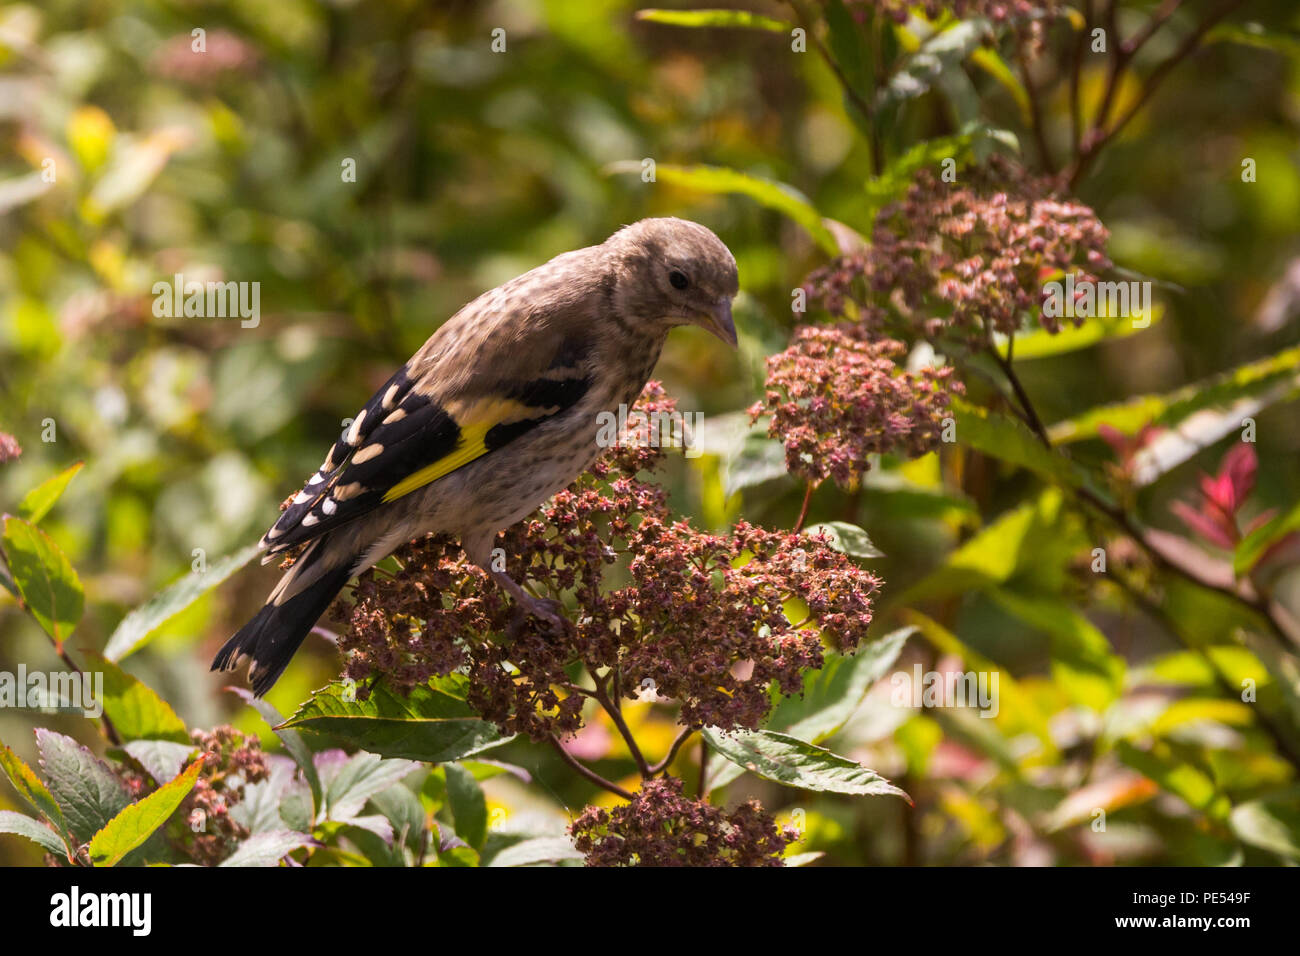 Juvenile Goldfinch. The red facial markings do not appear until adulthood. Stock Photo